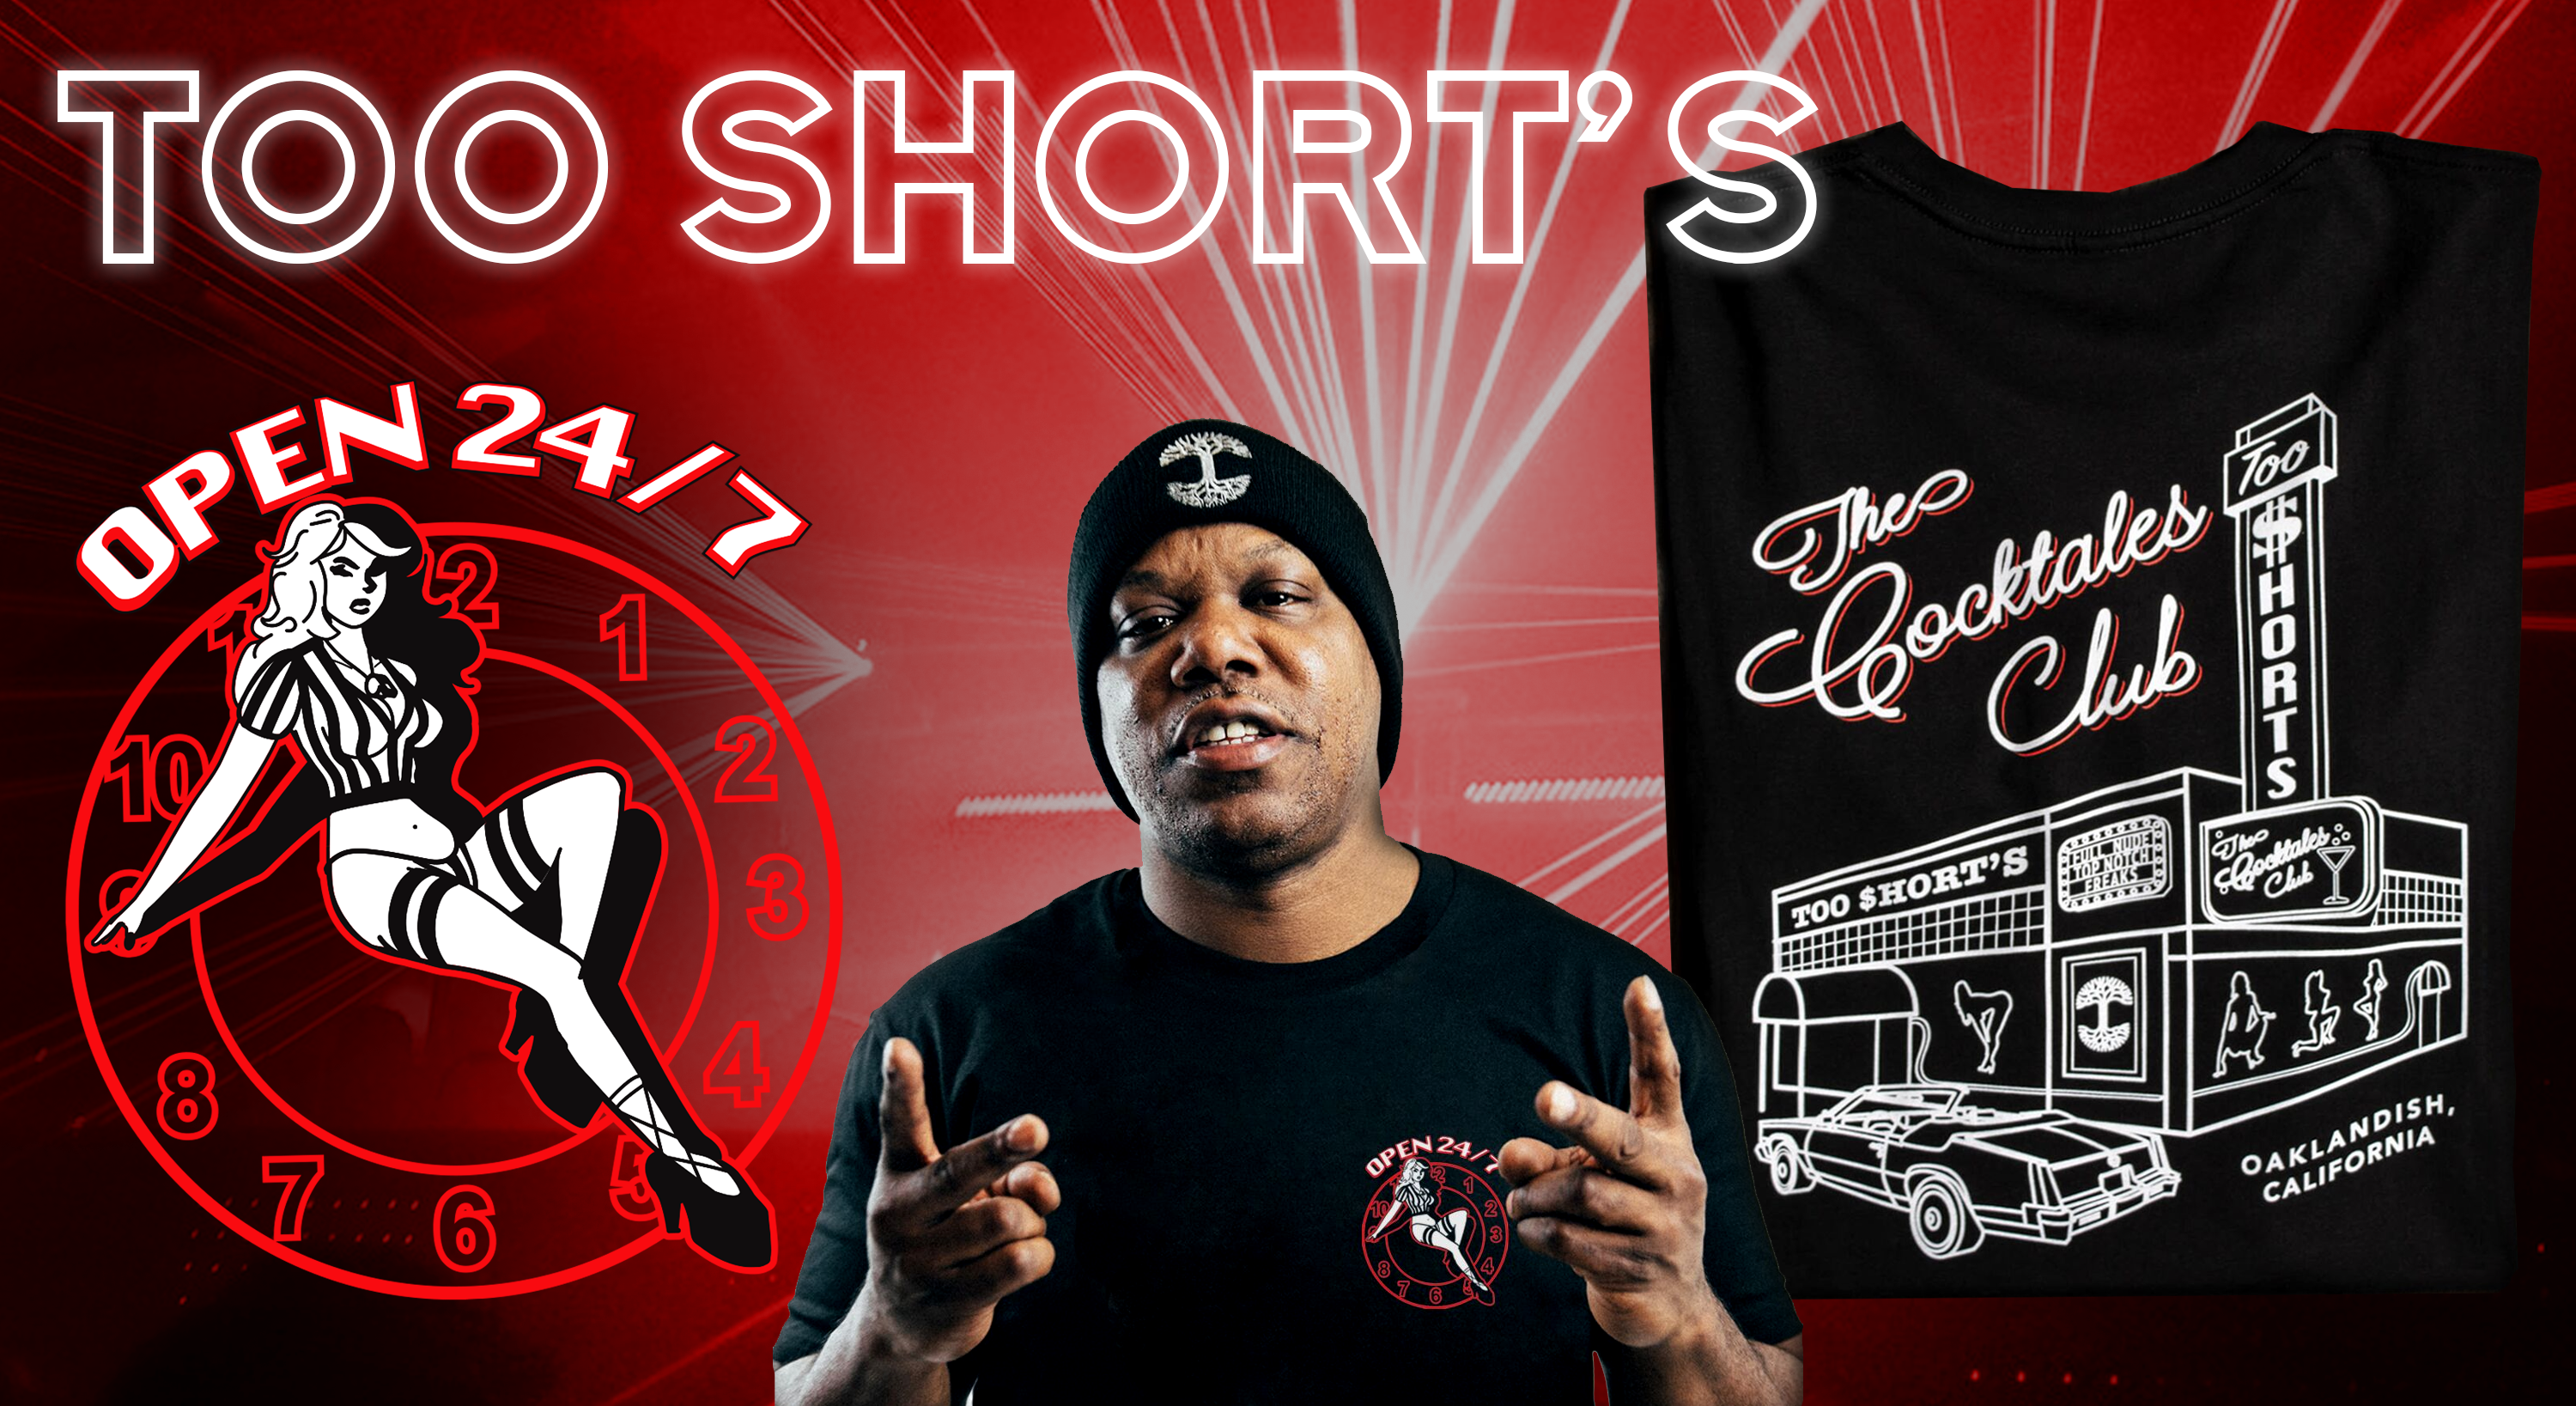 Too Short's The Cocktales club, photo of Short and pinup girl 24/7 design and tee photo.